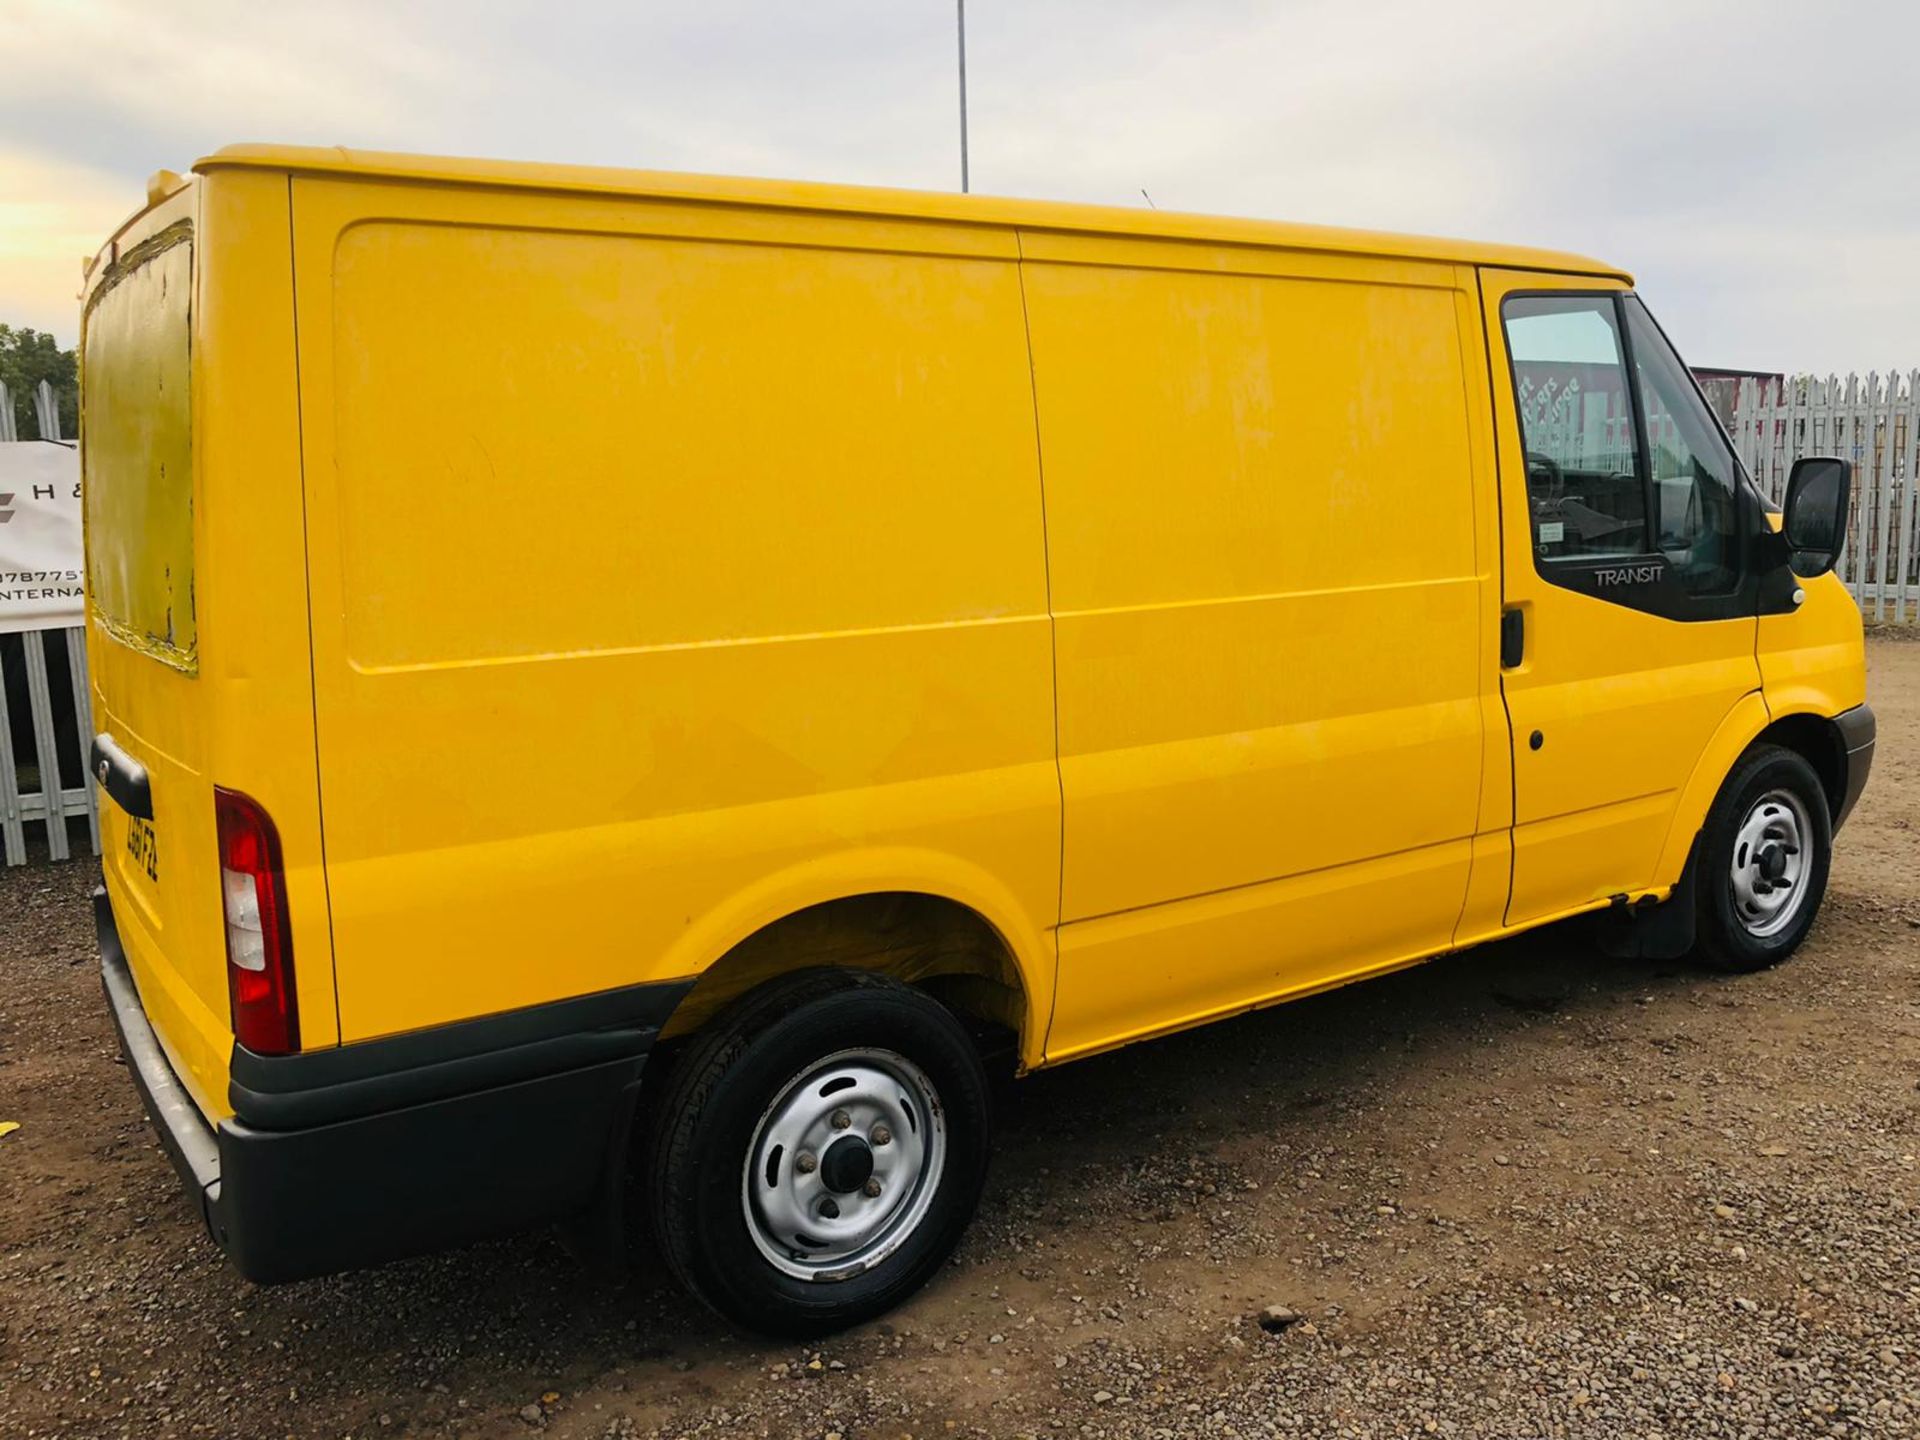 Ford Transit 2.2 TDCI 125 T300 L1 H1 FWD 2011 '61 Reg' Air Con - Elec Pack - No Vat Save 20% - Image 16 of 32